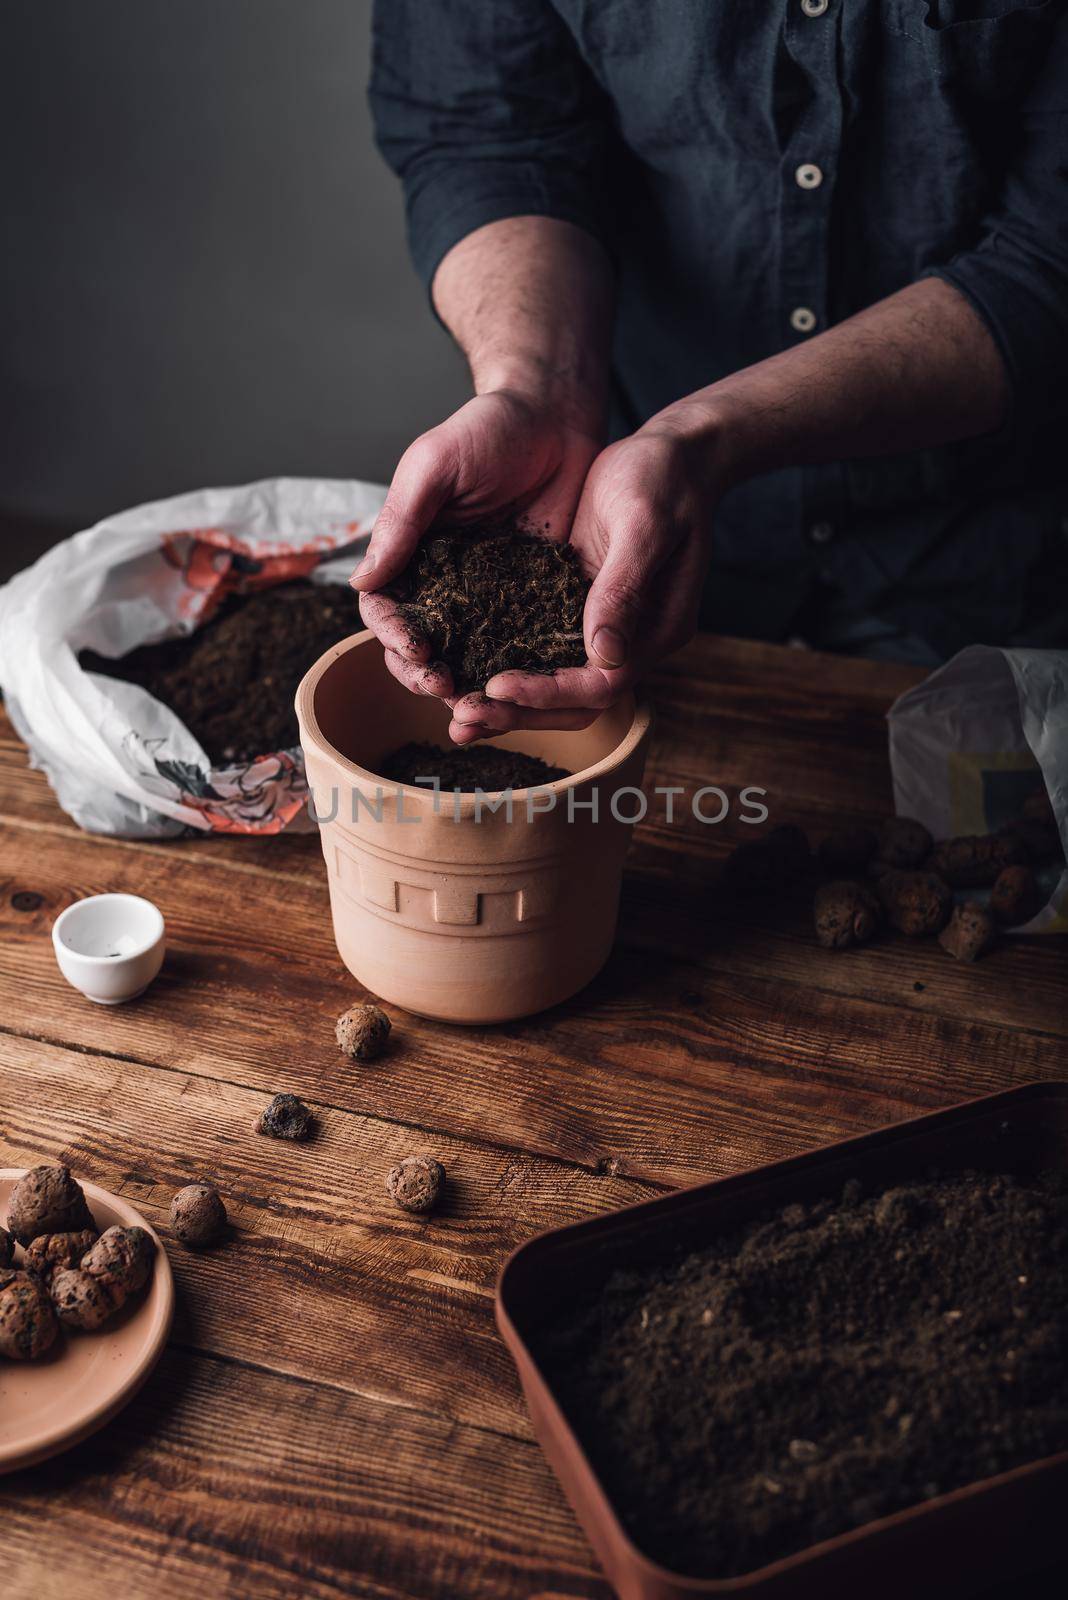 Man Putting Potting Soil into Pot for Sowing Thyme by Seva_blsv